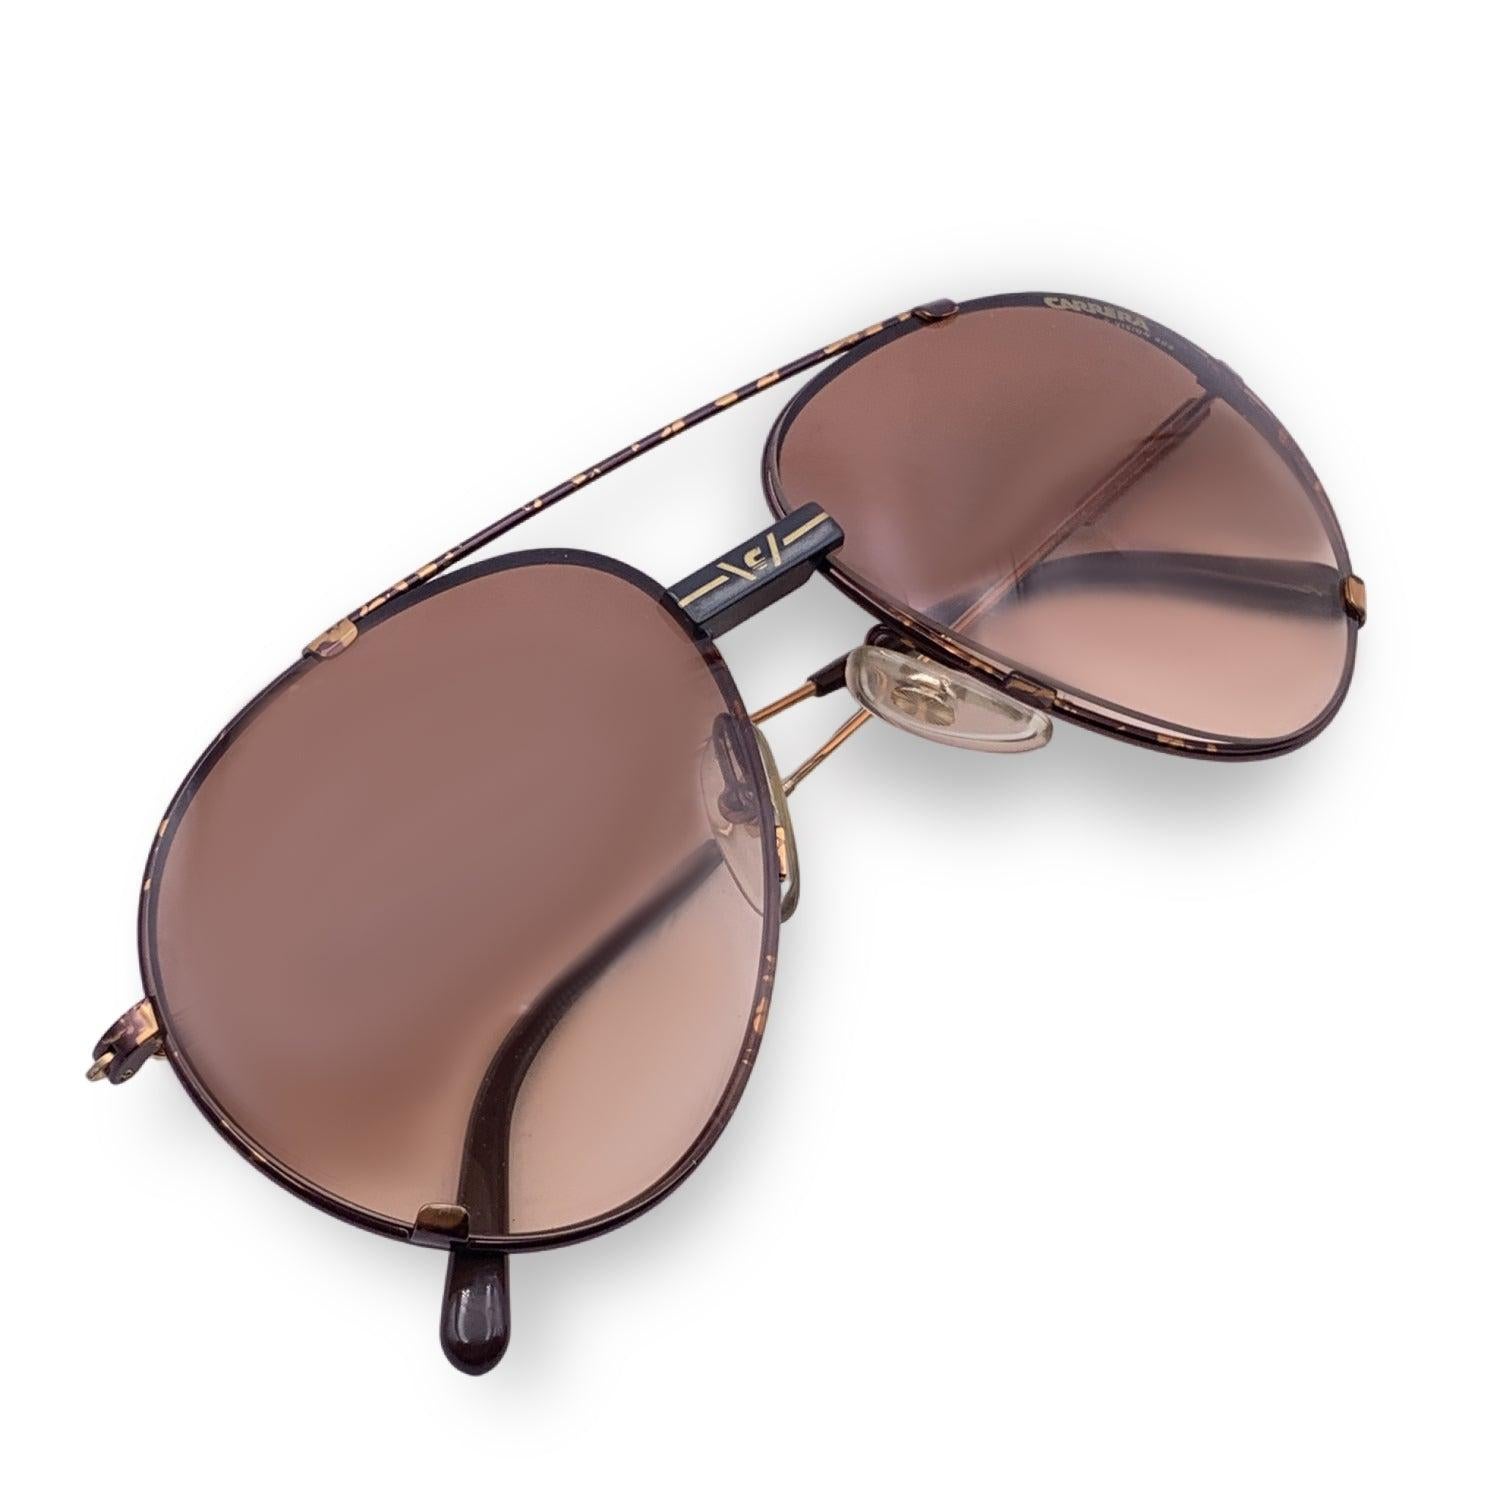 Vintage Carrera C Vision 400 Brown Metal sunglasses. Model: 5463 42. Size: 60/16 140mm. Brown metal frame and gold temples with brown acetate on the finish. 100% Total UVA/UVB protection. Gradient Brown lenses. Carrera branding to the bridge.